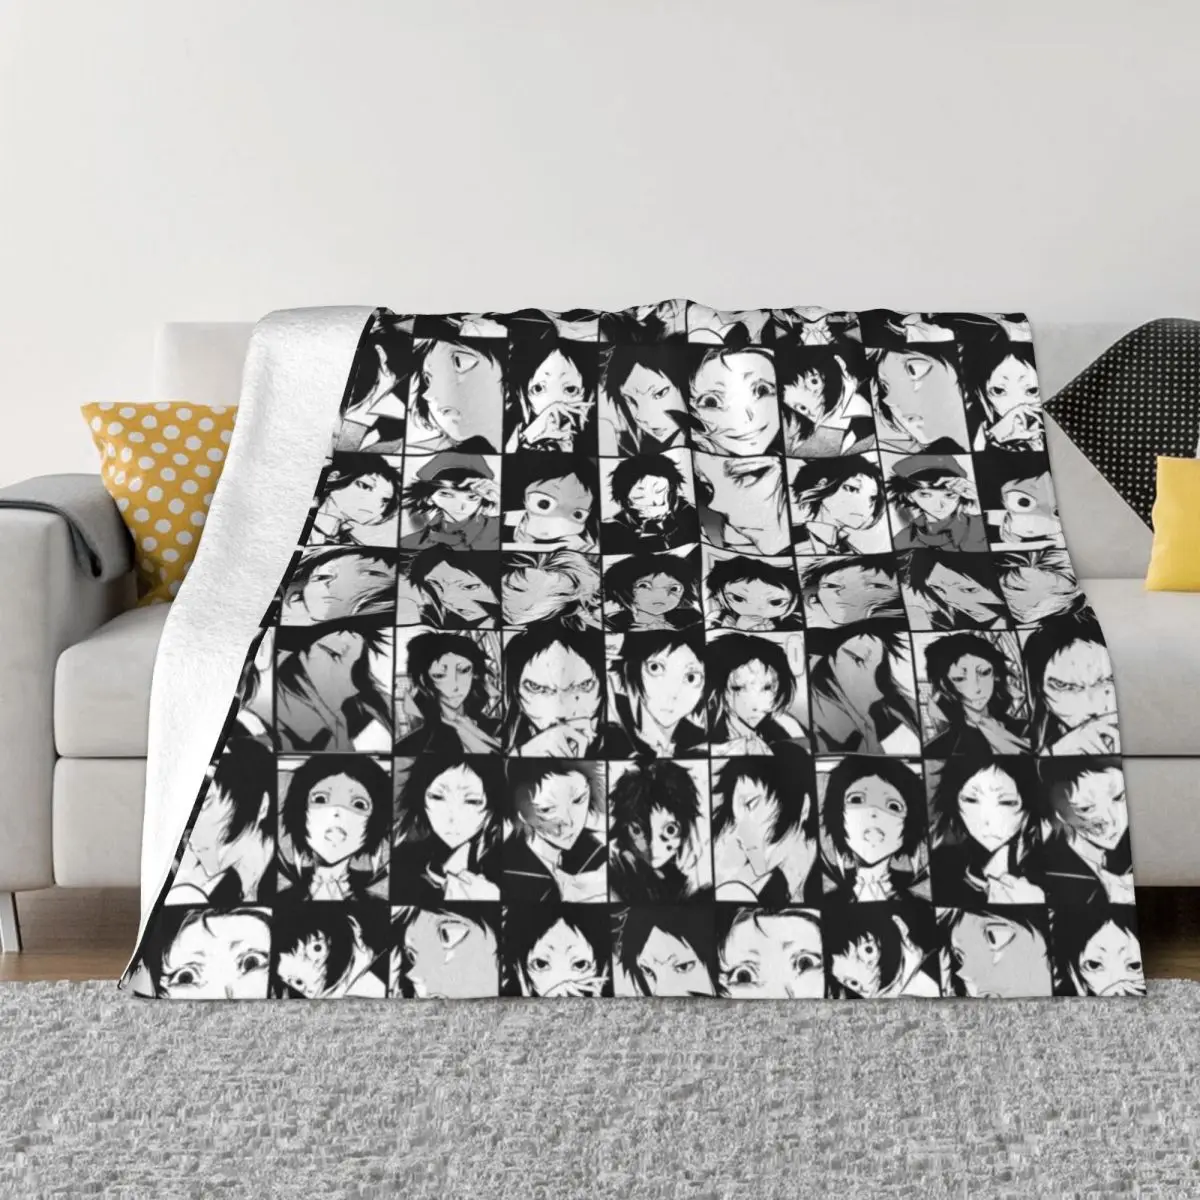 

Akutagawa Ryunosuke My Hero Academia Blankets Flannel Winter Black And White Warm Throw Blankets for Bed Couch Bedding Throws